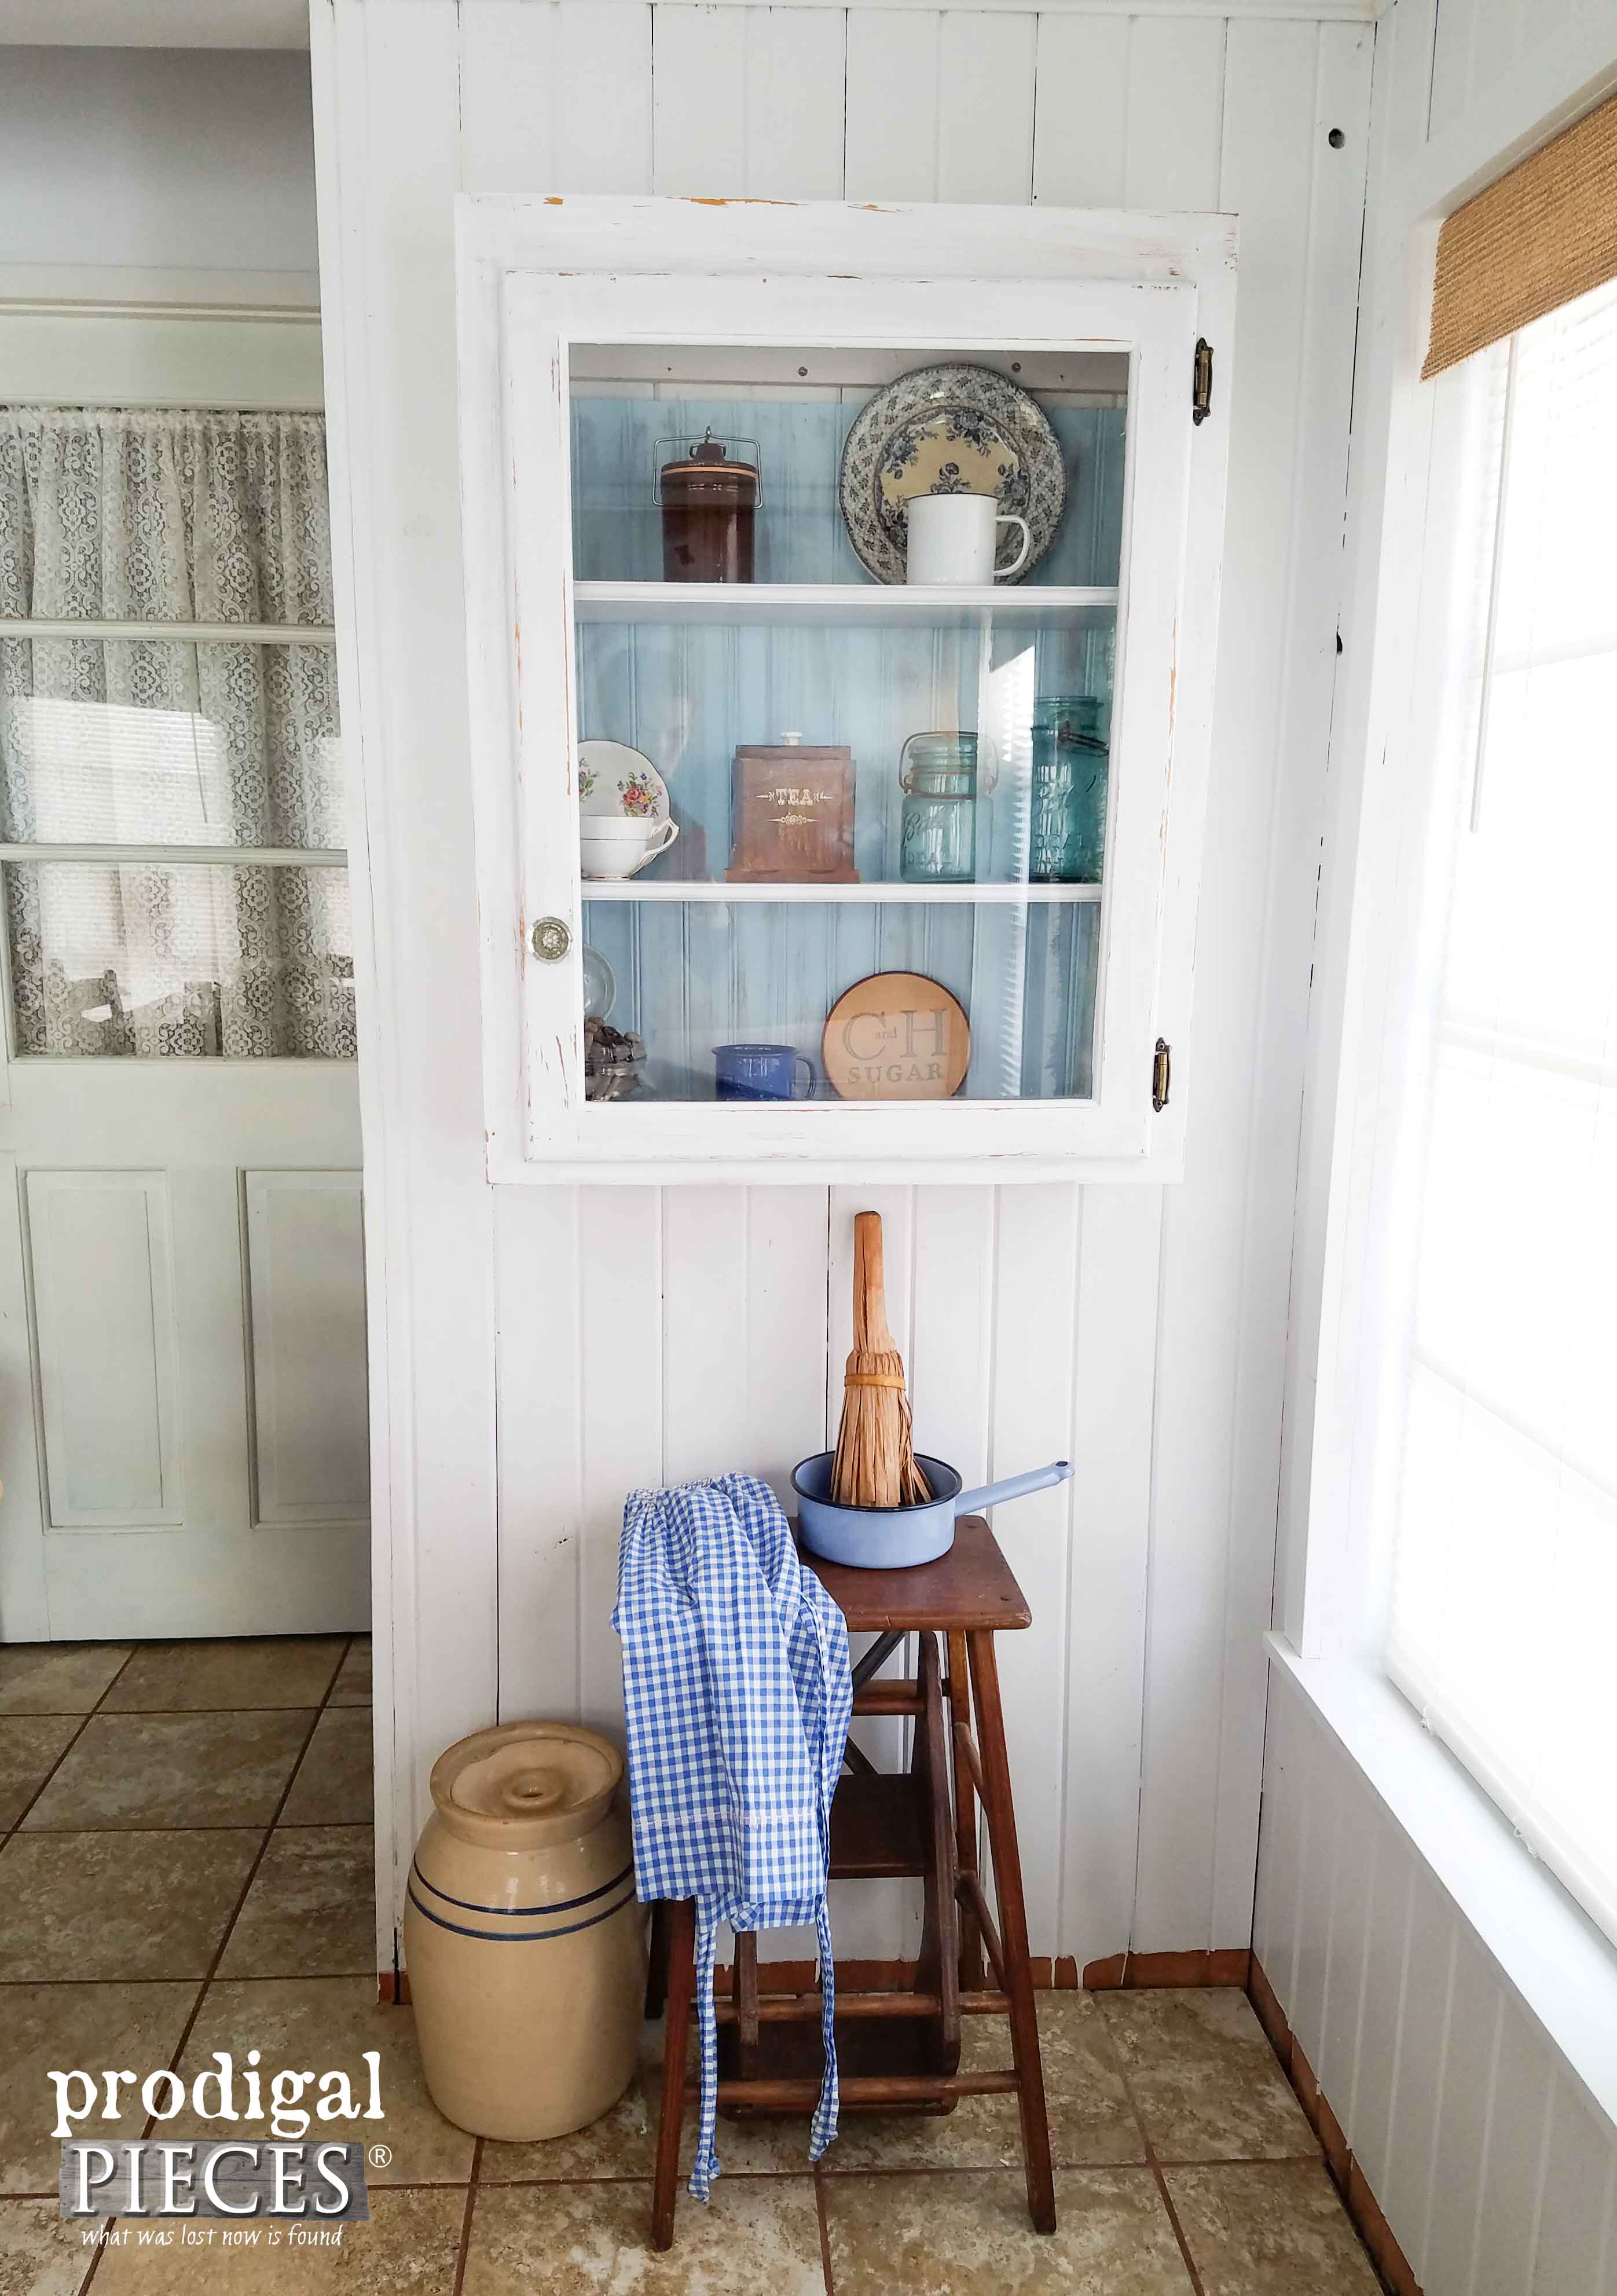 Rustic Farmhouse Cupboard Makeover by Prodigal Pieces | www.prodigalpieces.com